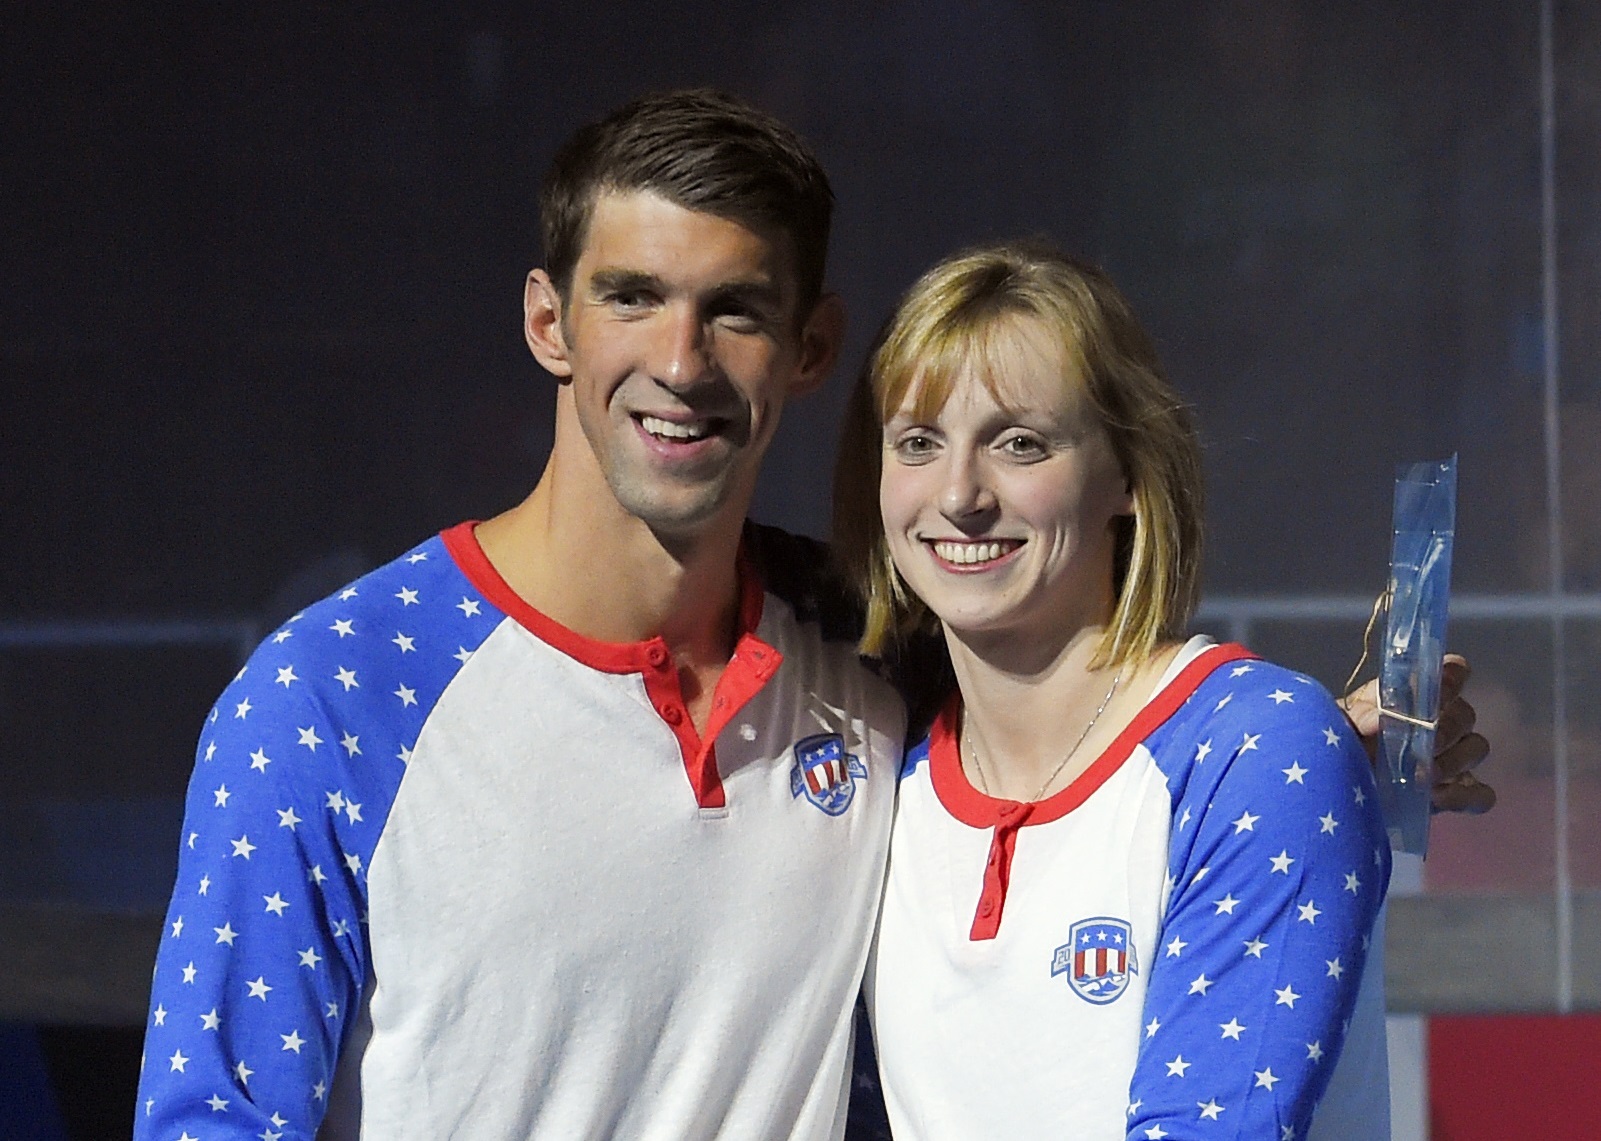 Michael Phelps stands with Katie Ledecky, right, during the team introductions at the conclusion of the U.S. Olympic swimming trials, Sunday, July 3, 2016, in Omaha, Neb. (AP Photo/Mark J. Terrill)